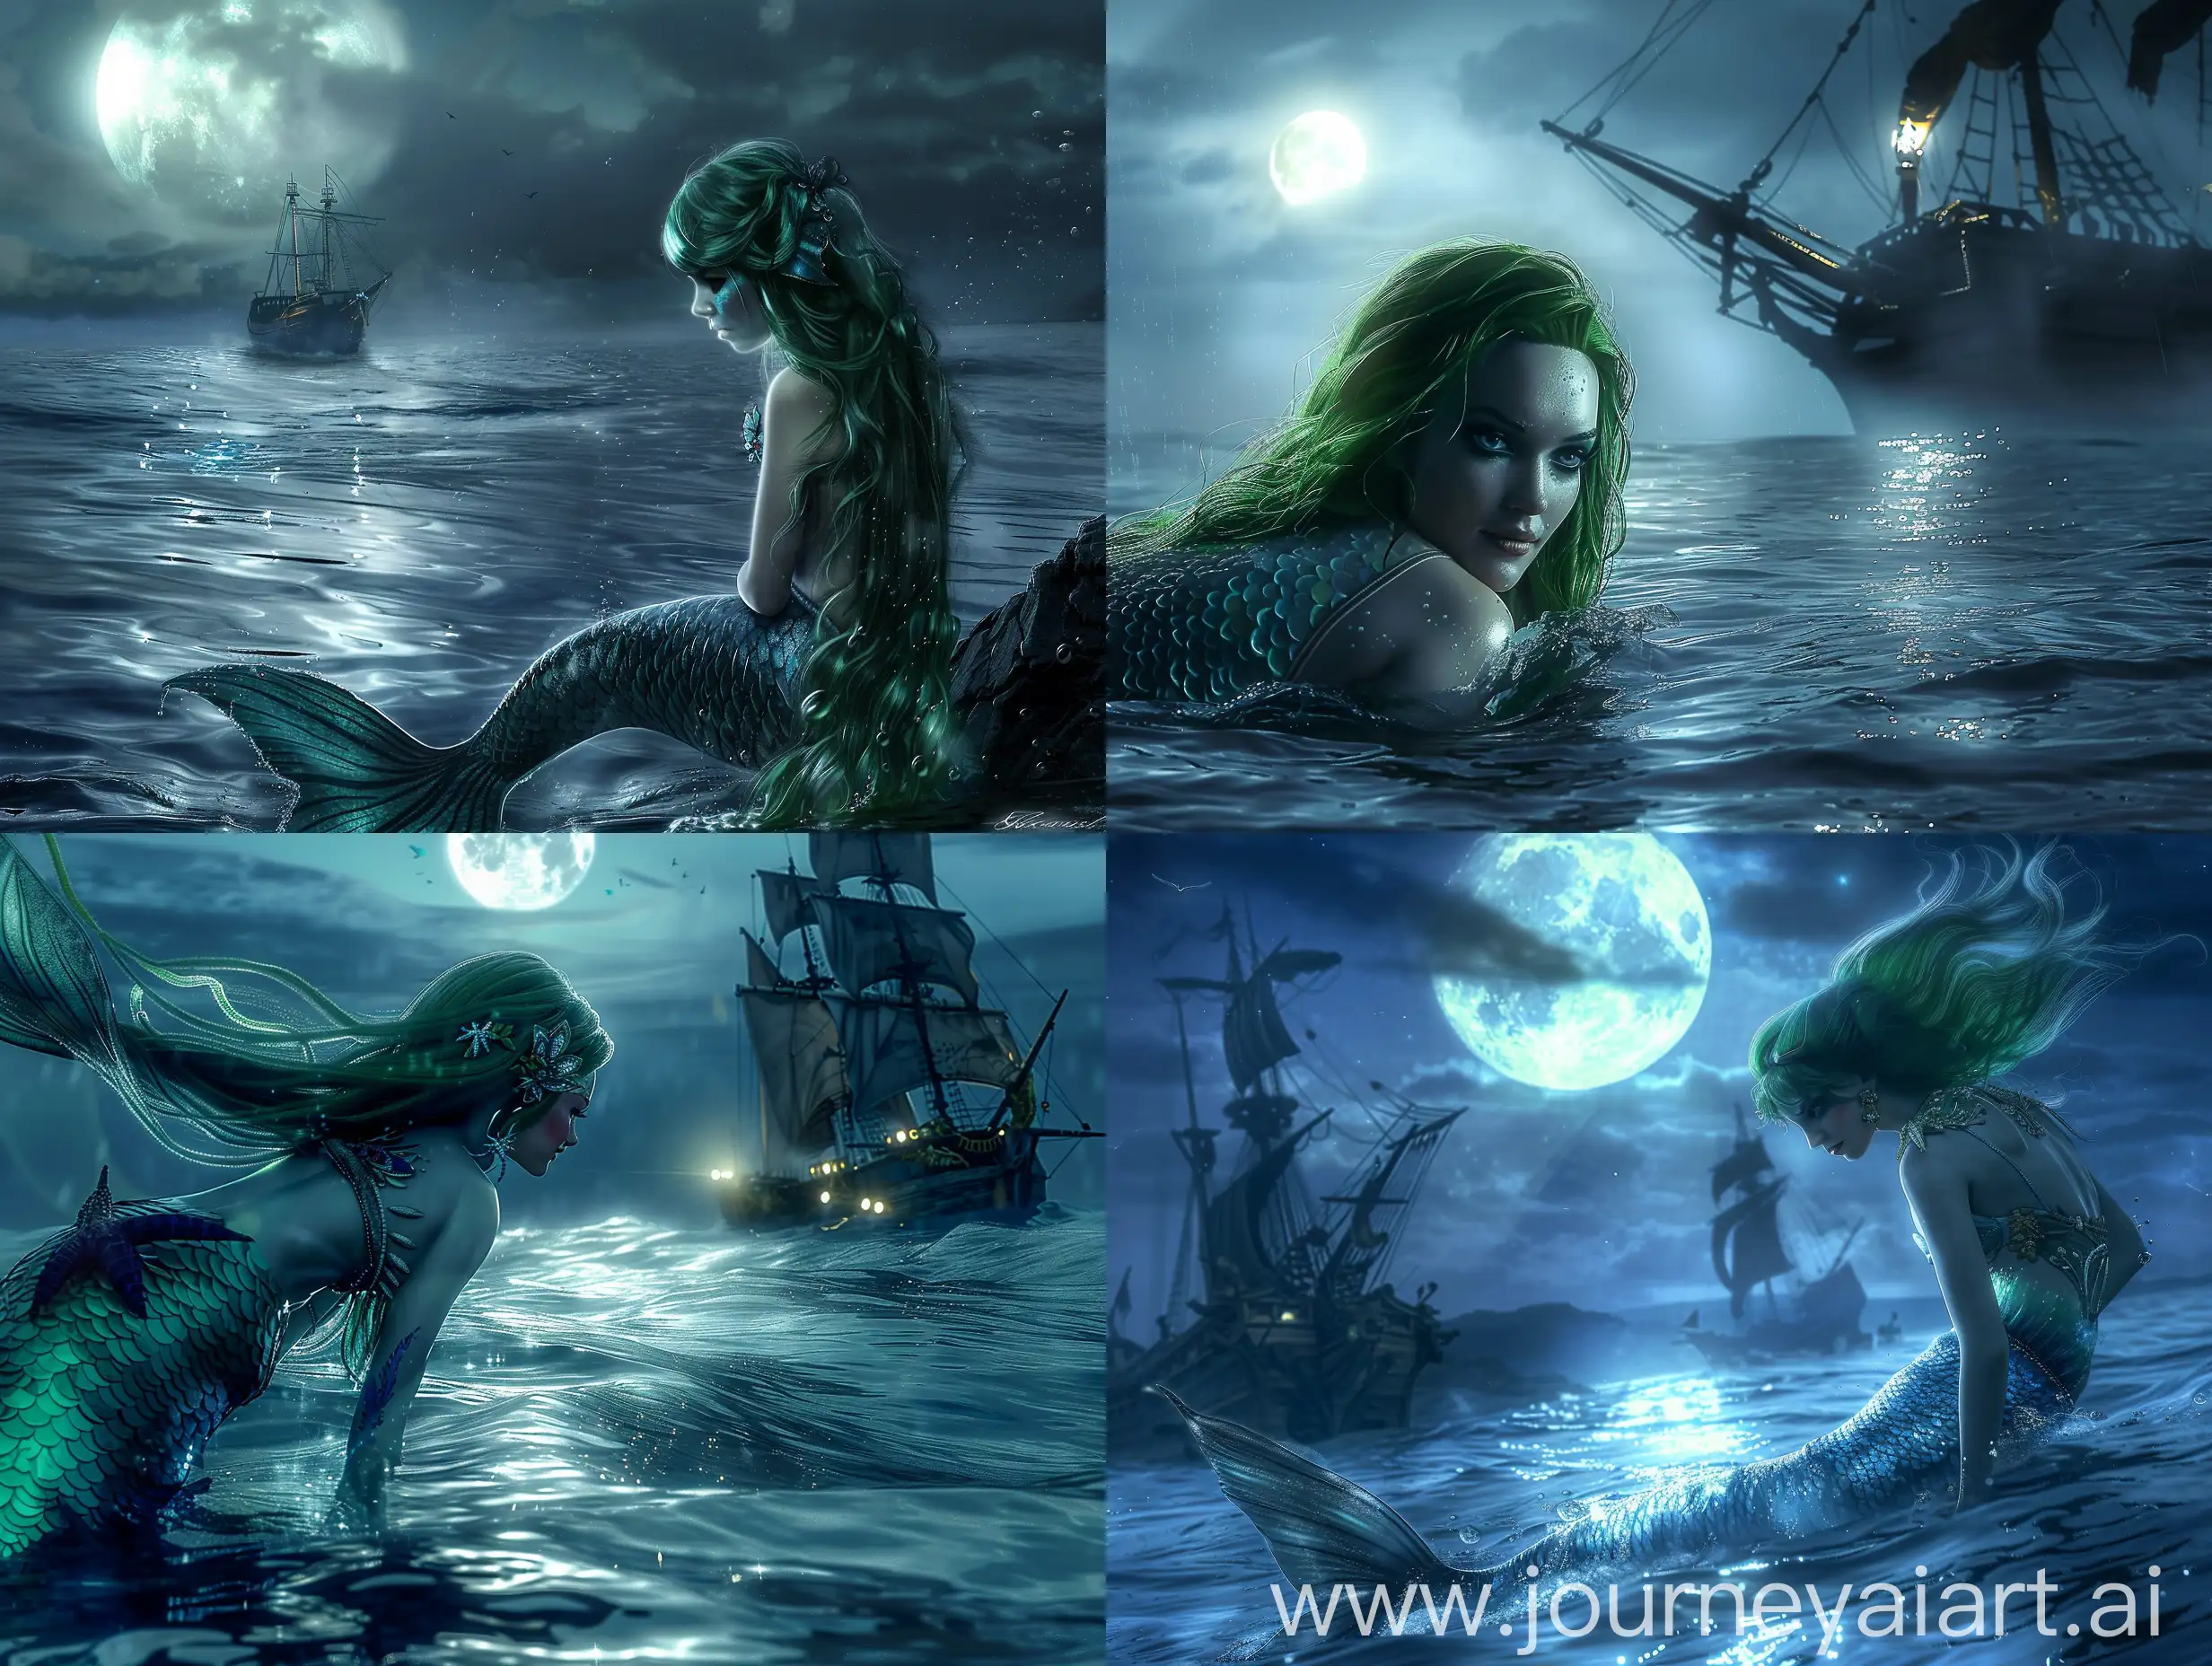 mermaid princess with green hair, swimming near the ocean surface, looking at a human ship, moonlit night, calm sea, cinematic, highly detailed, dramatic lighting, realistic, movie scene